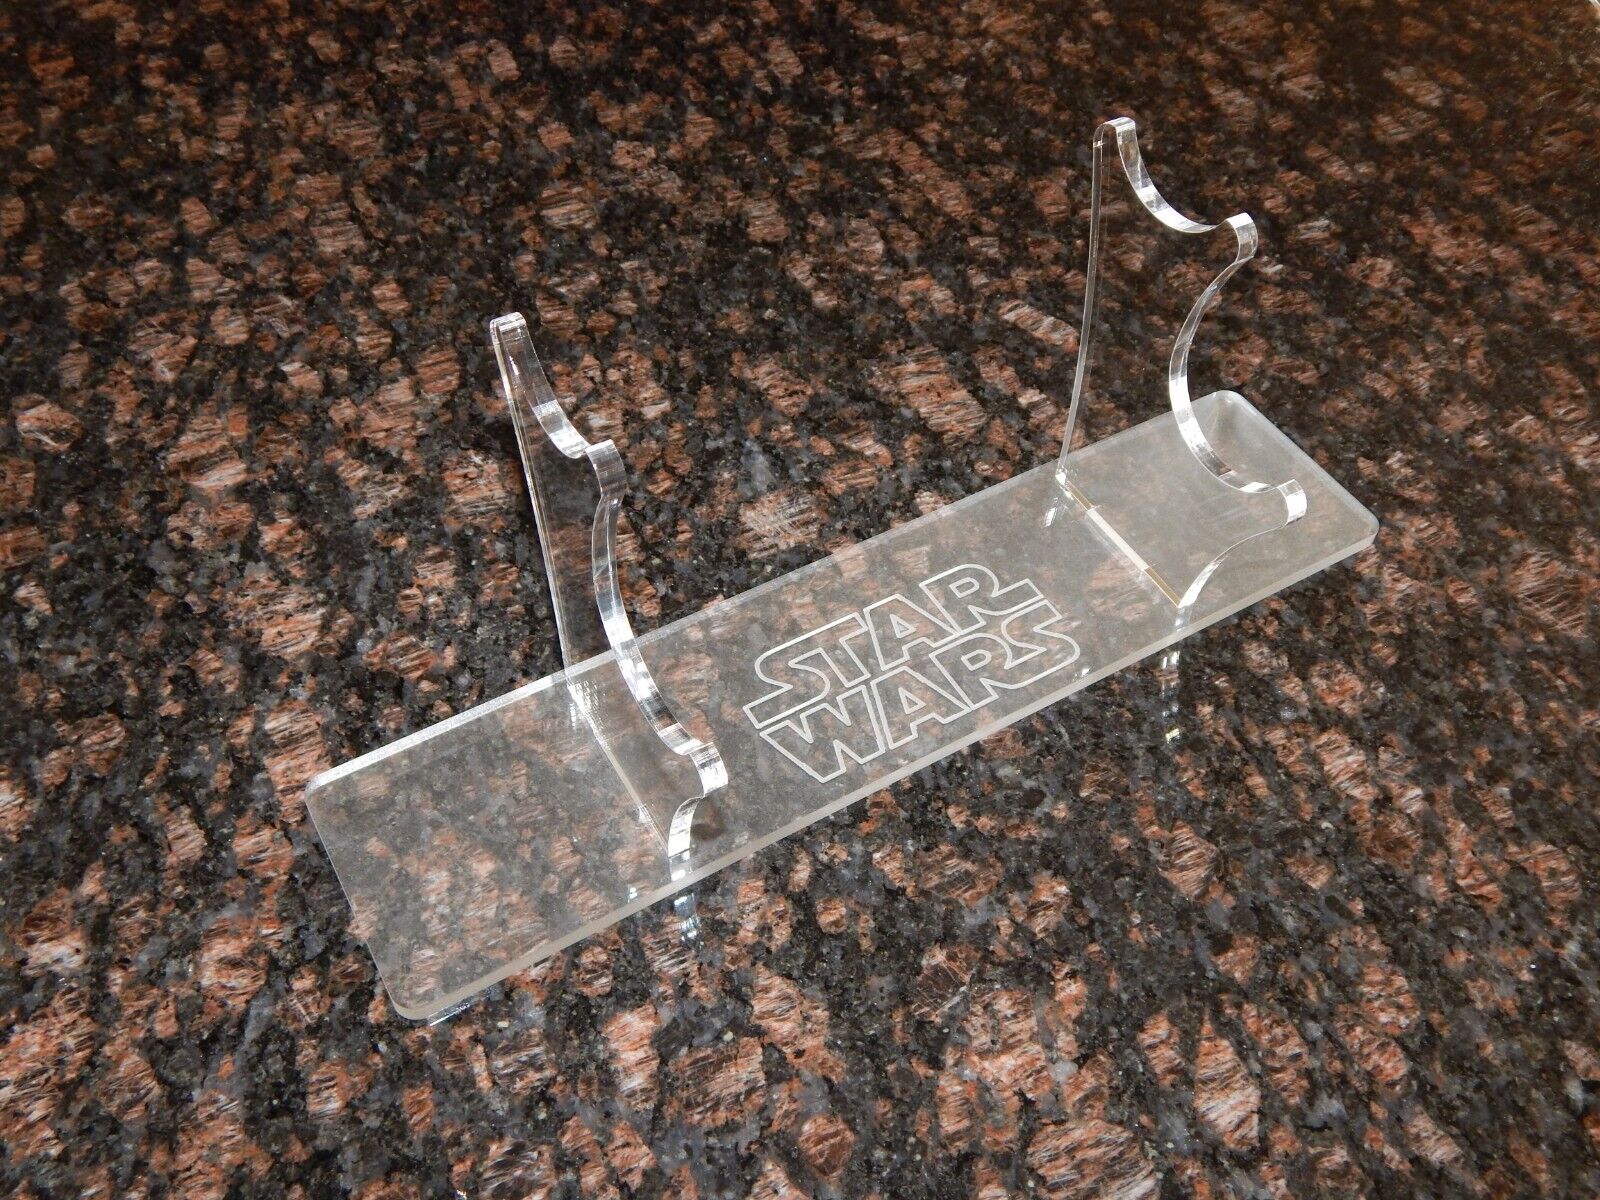 Acrylic 2 tier Light saber display stand w engraved Star Wars image FROSTED BASE